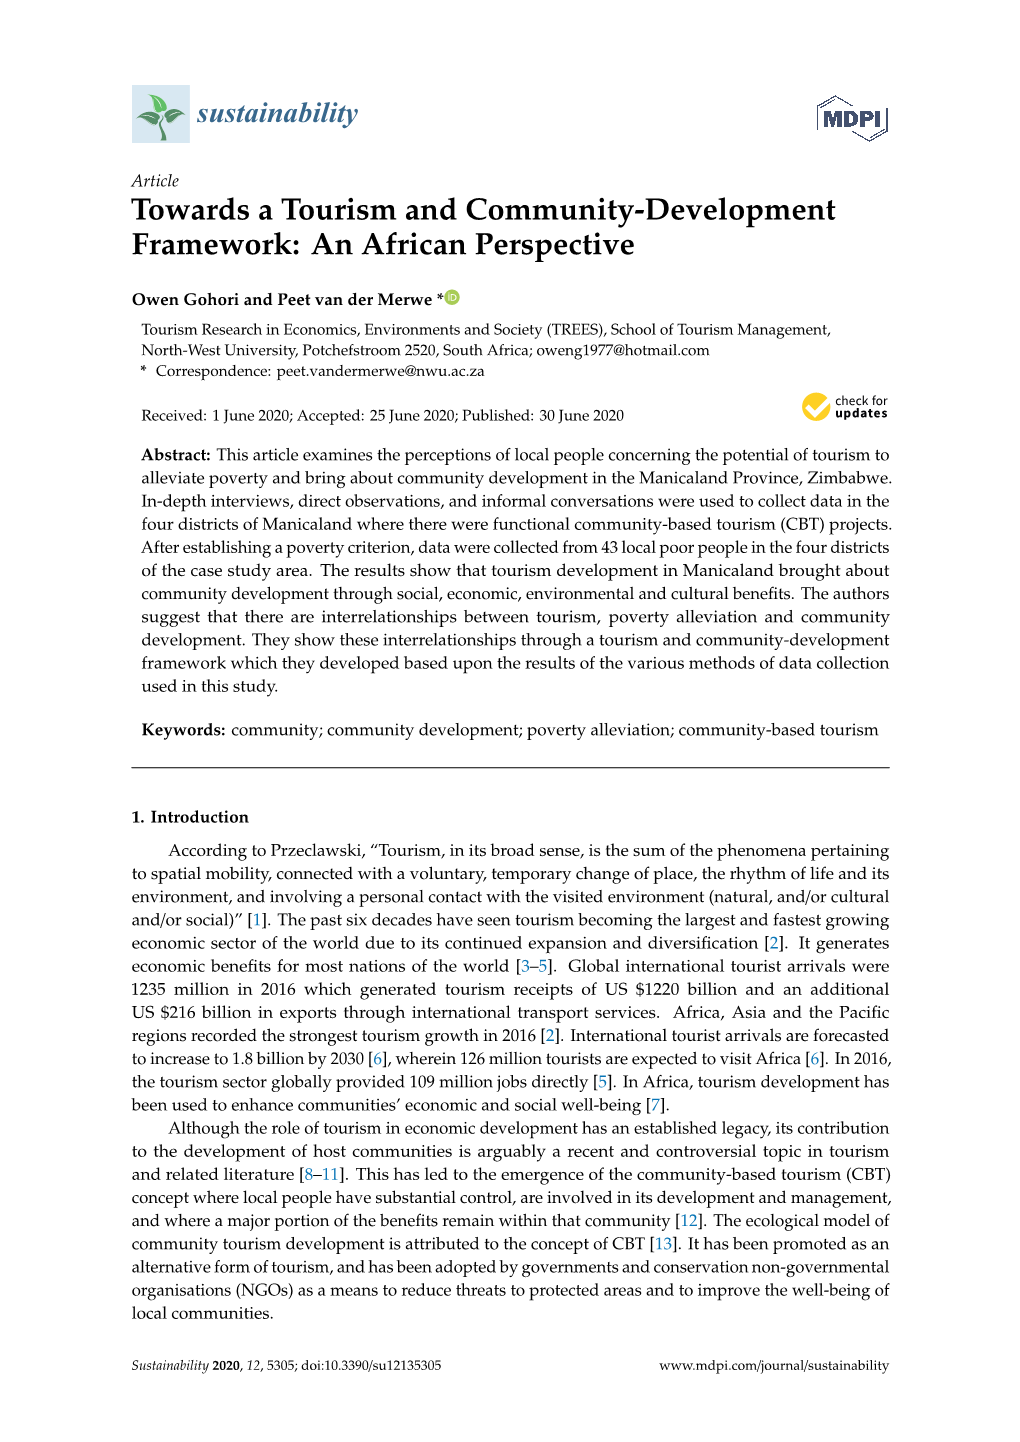 Towards a Tourism and Community-Development Framework: an African Perspective